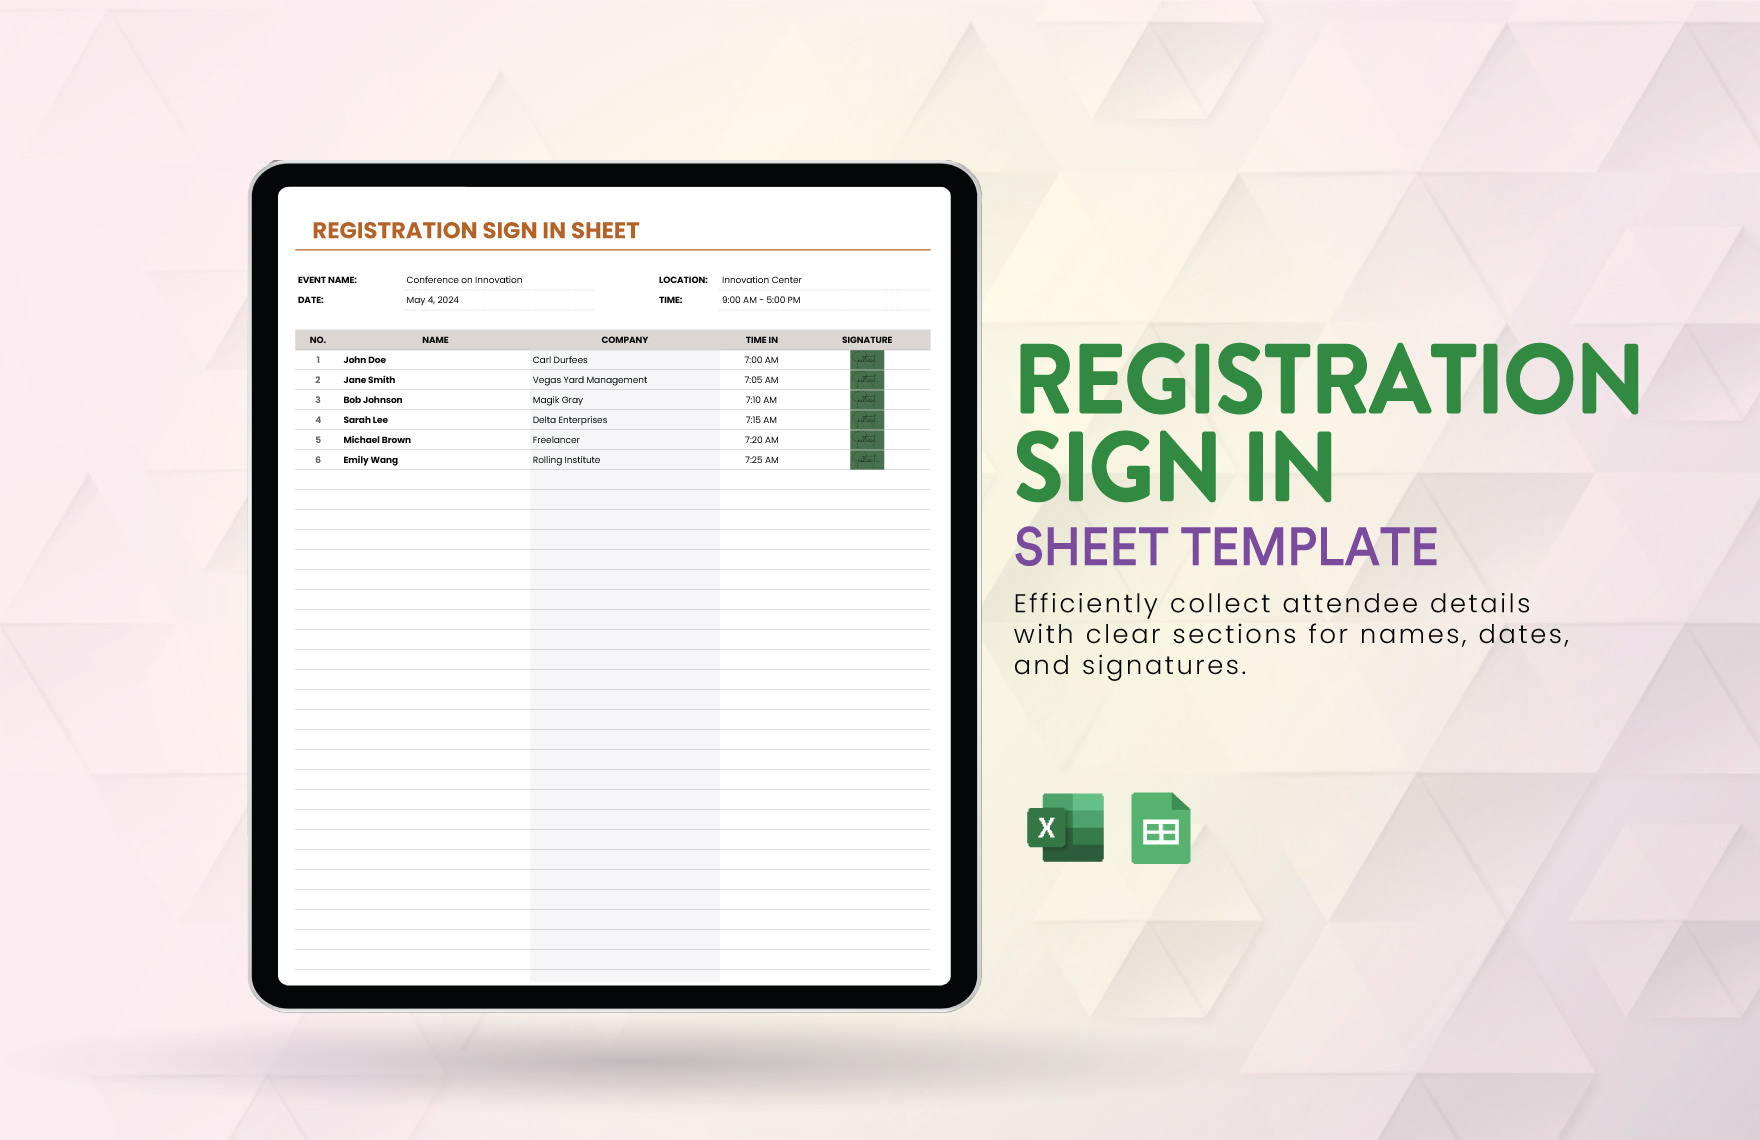 Registration Sign in Sheet Template